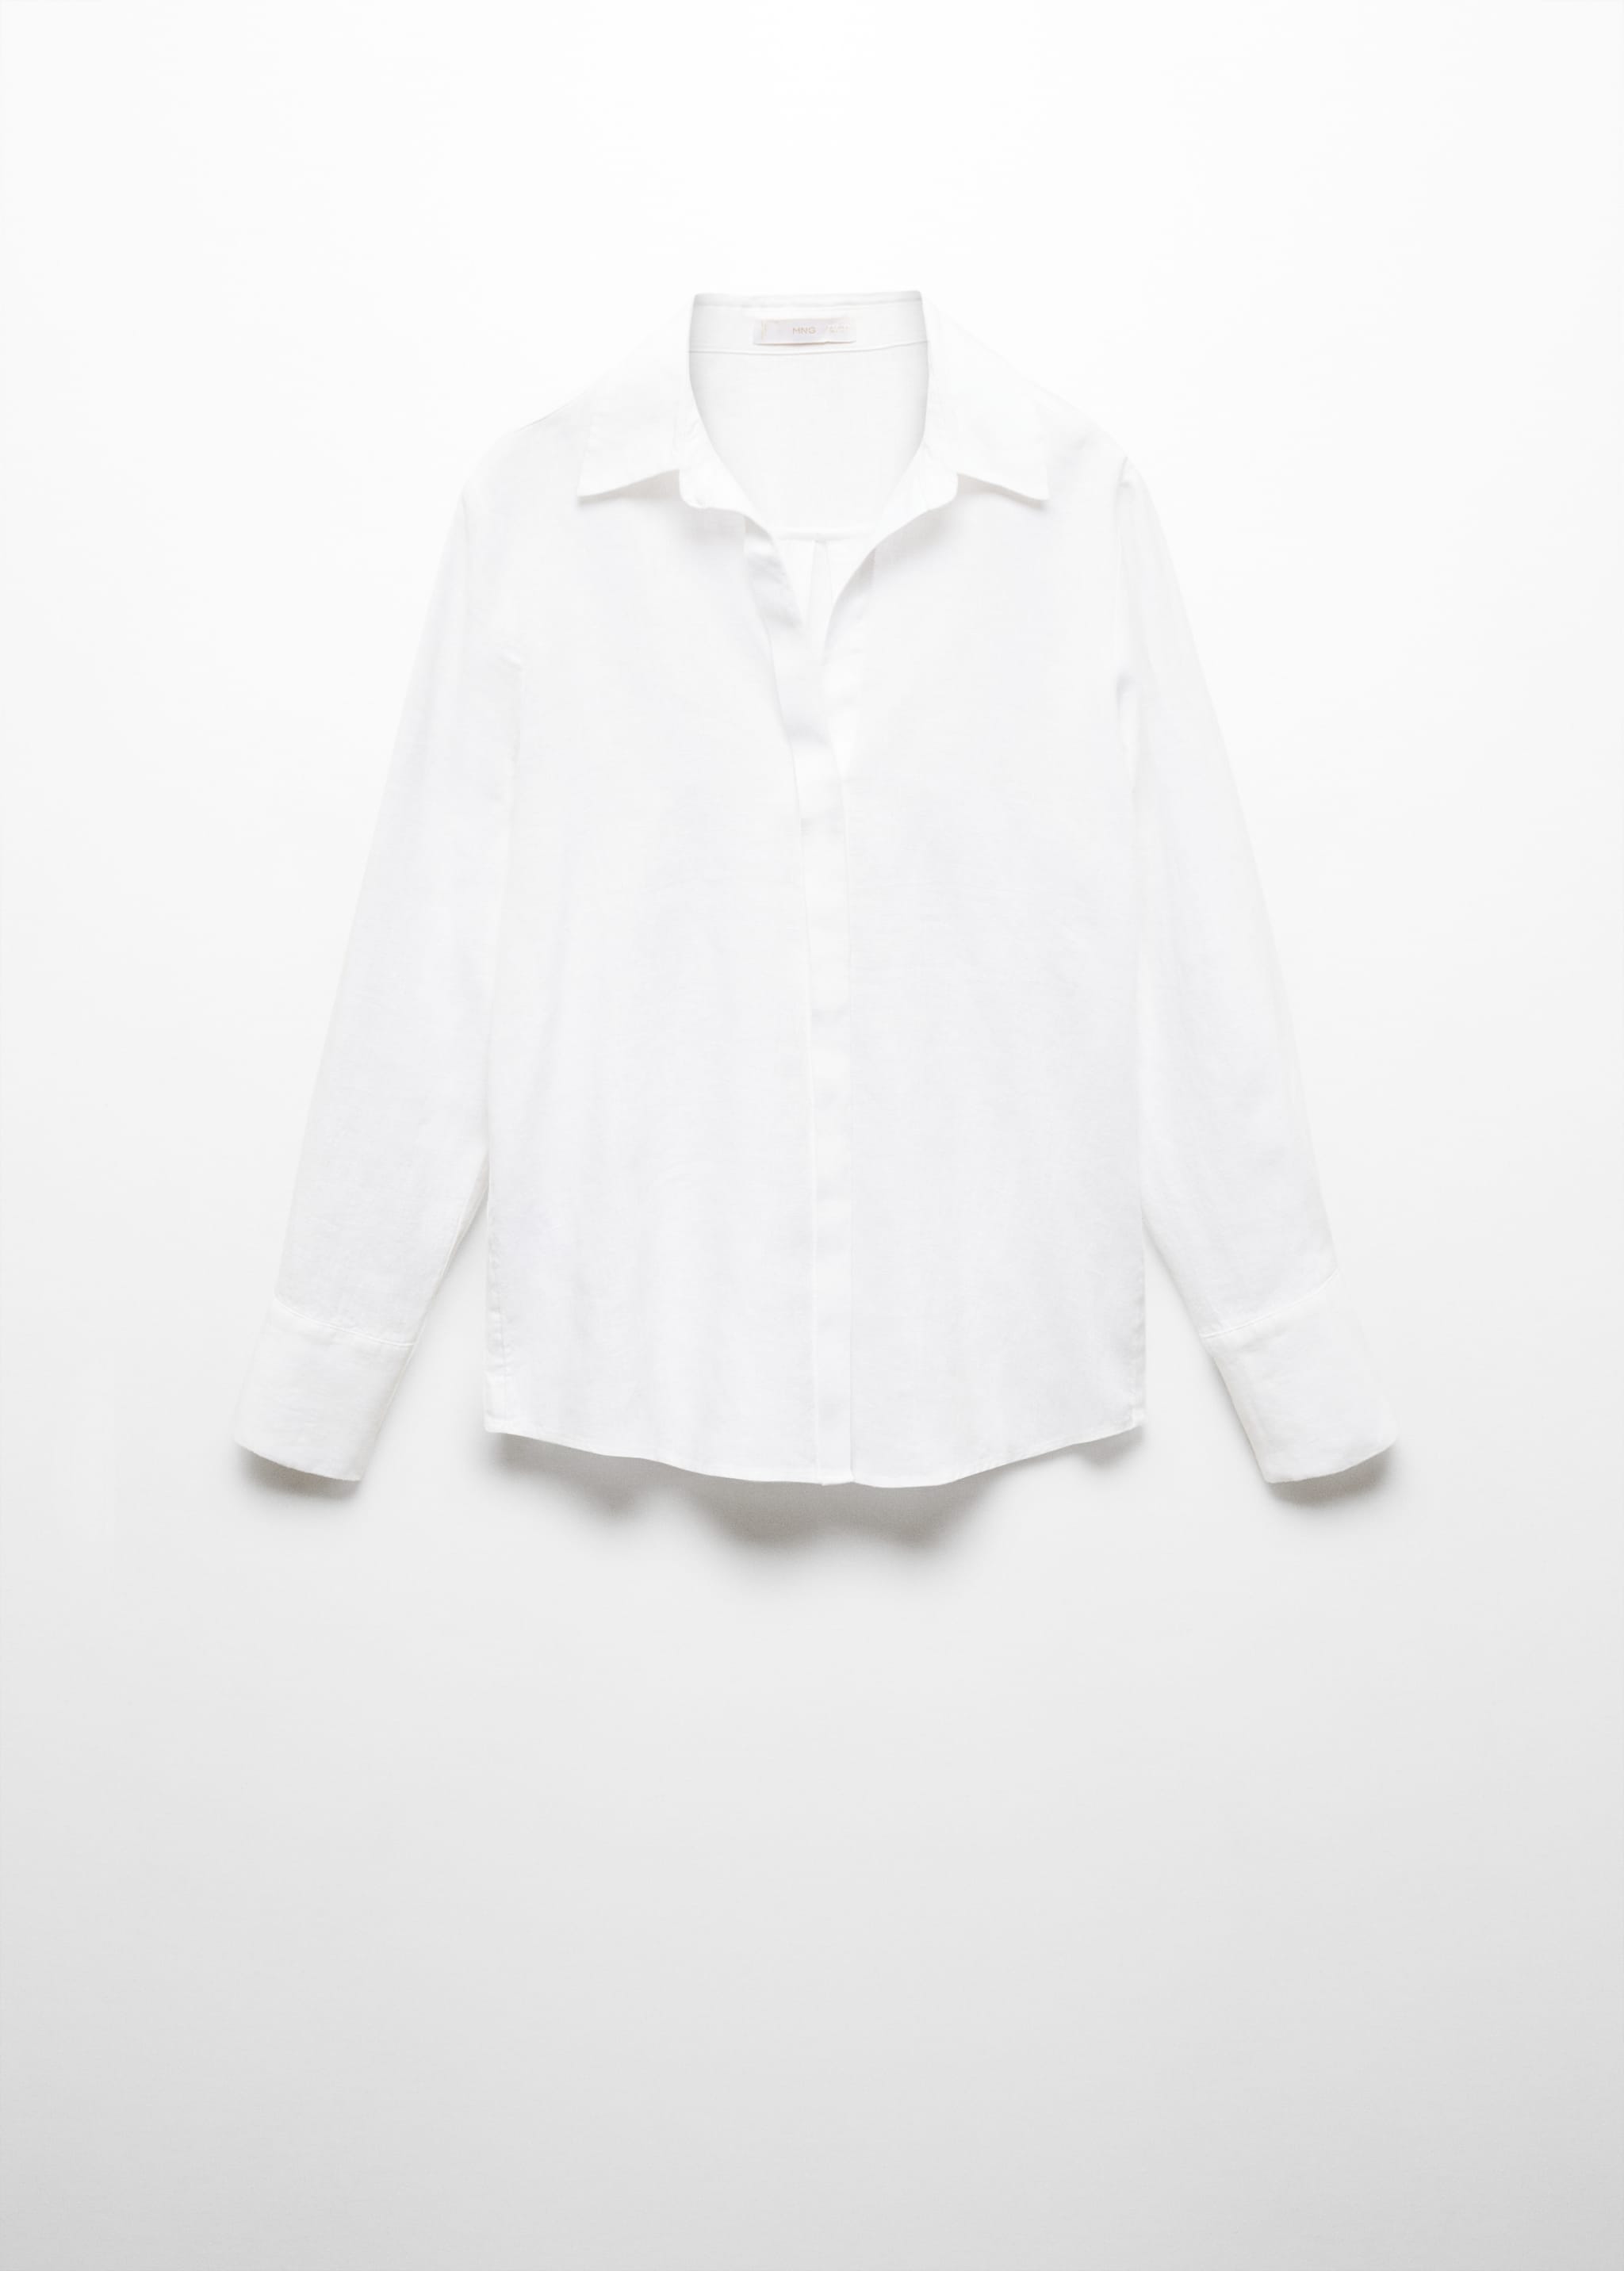 Linen 100% shirt - Article without model